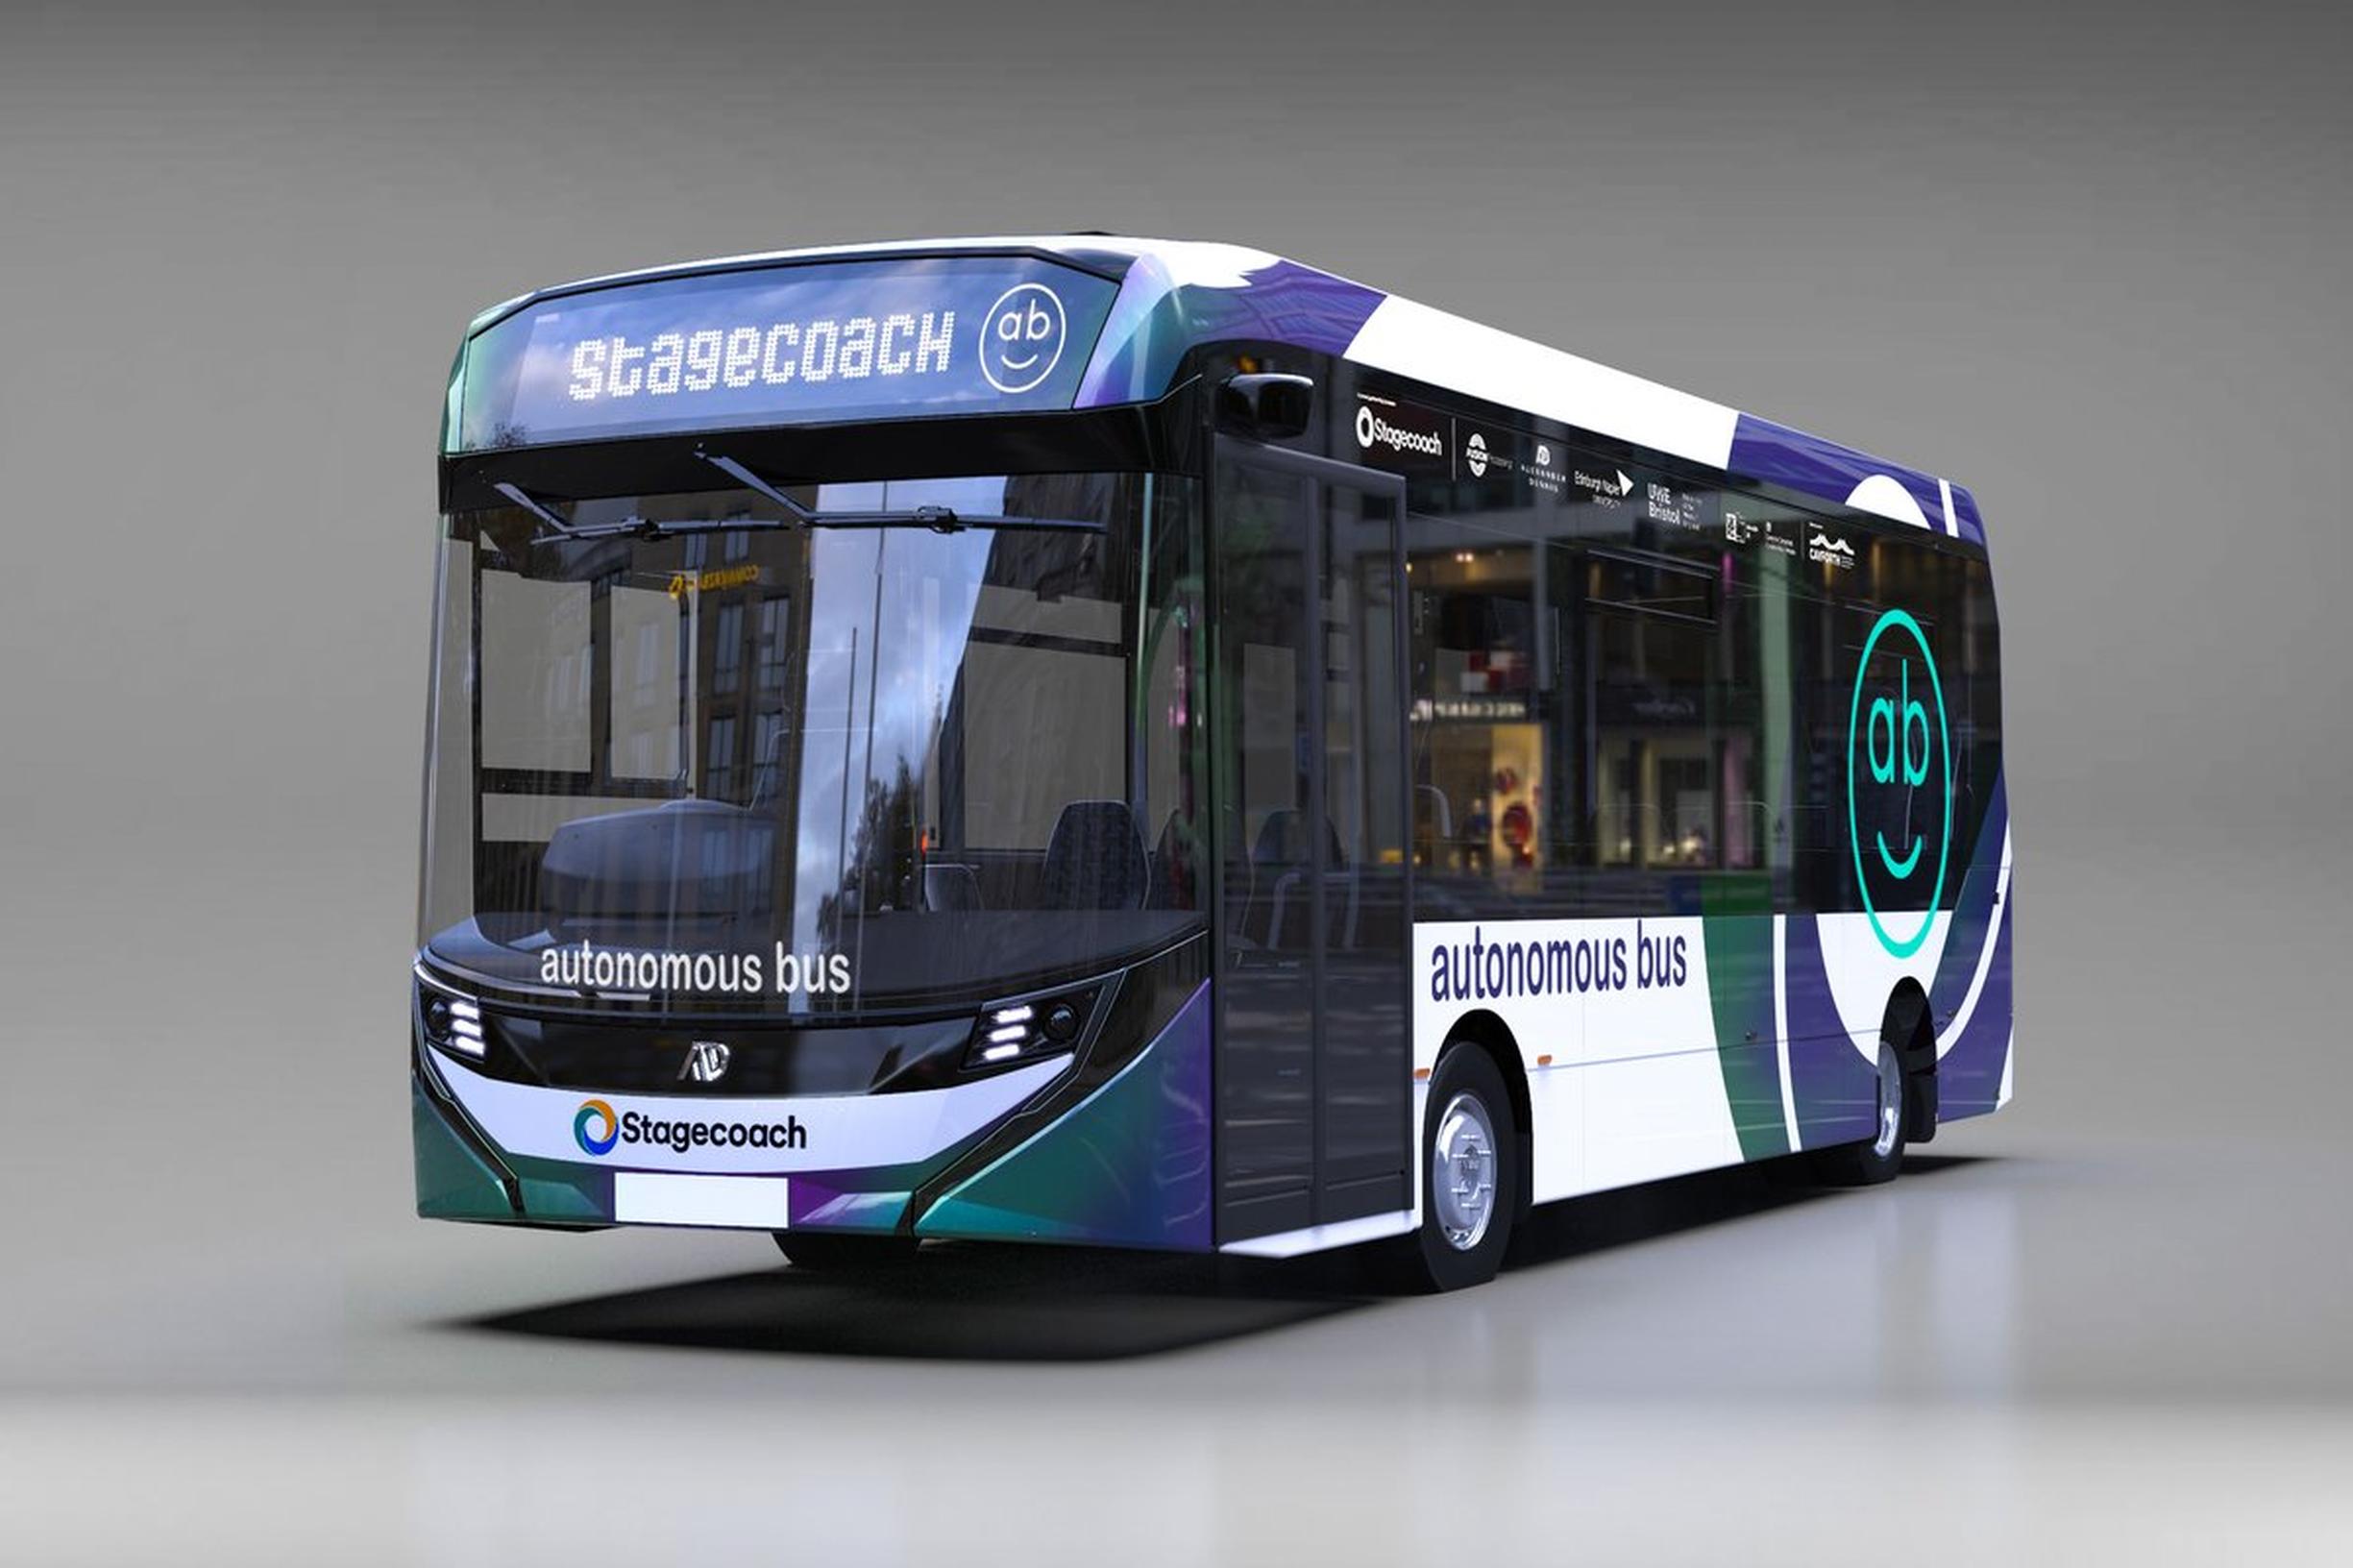 Alexander Dennis is providing the autonomous buses used on the CAVForth II project in Edinburgh